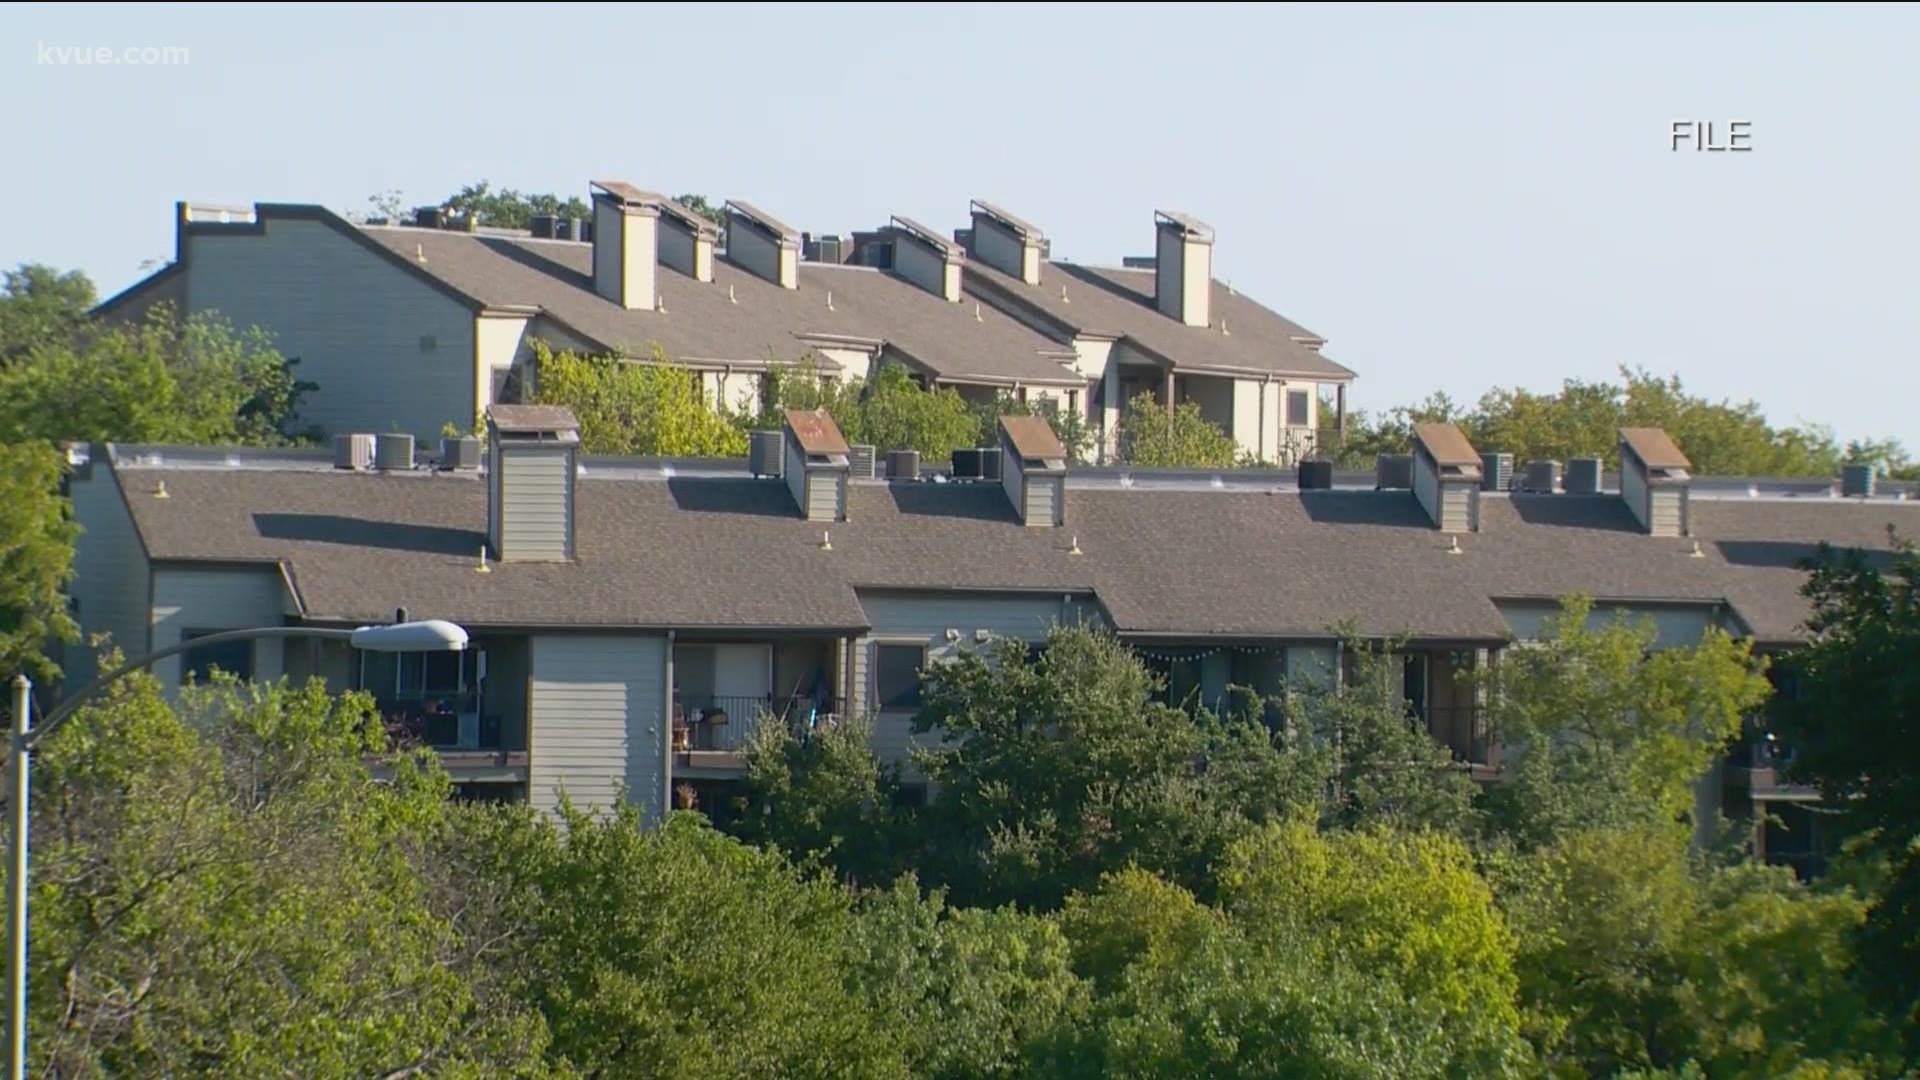 Protections for some renters are coming to an end. Landlords can start evicting people who are behind on rent, effective June 1. KVUE's Bryce Newberry explains.